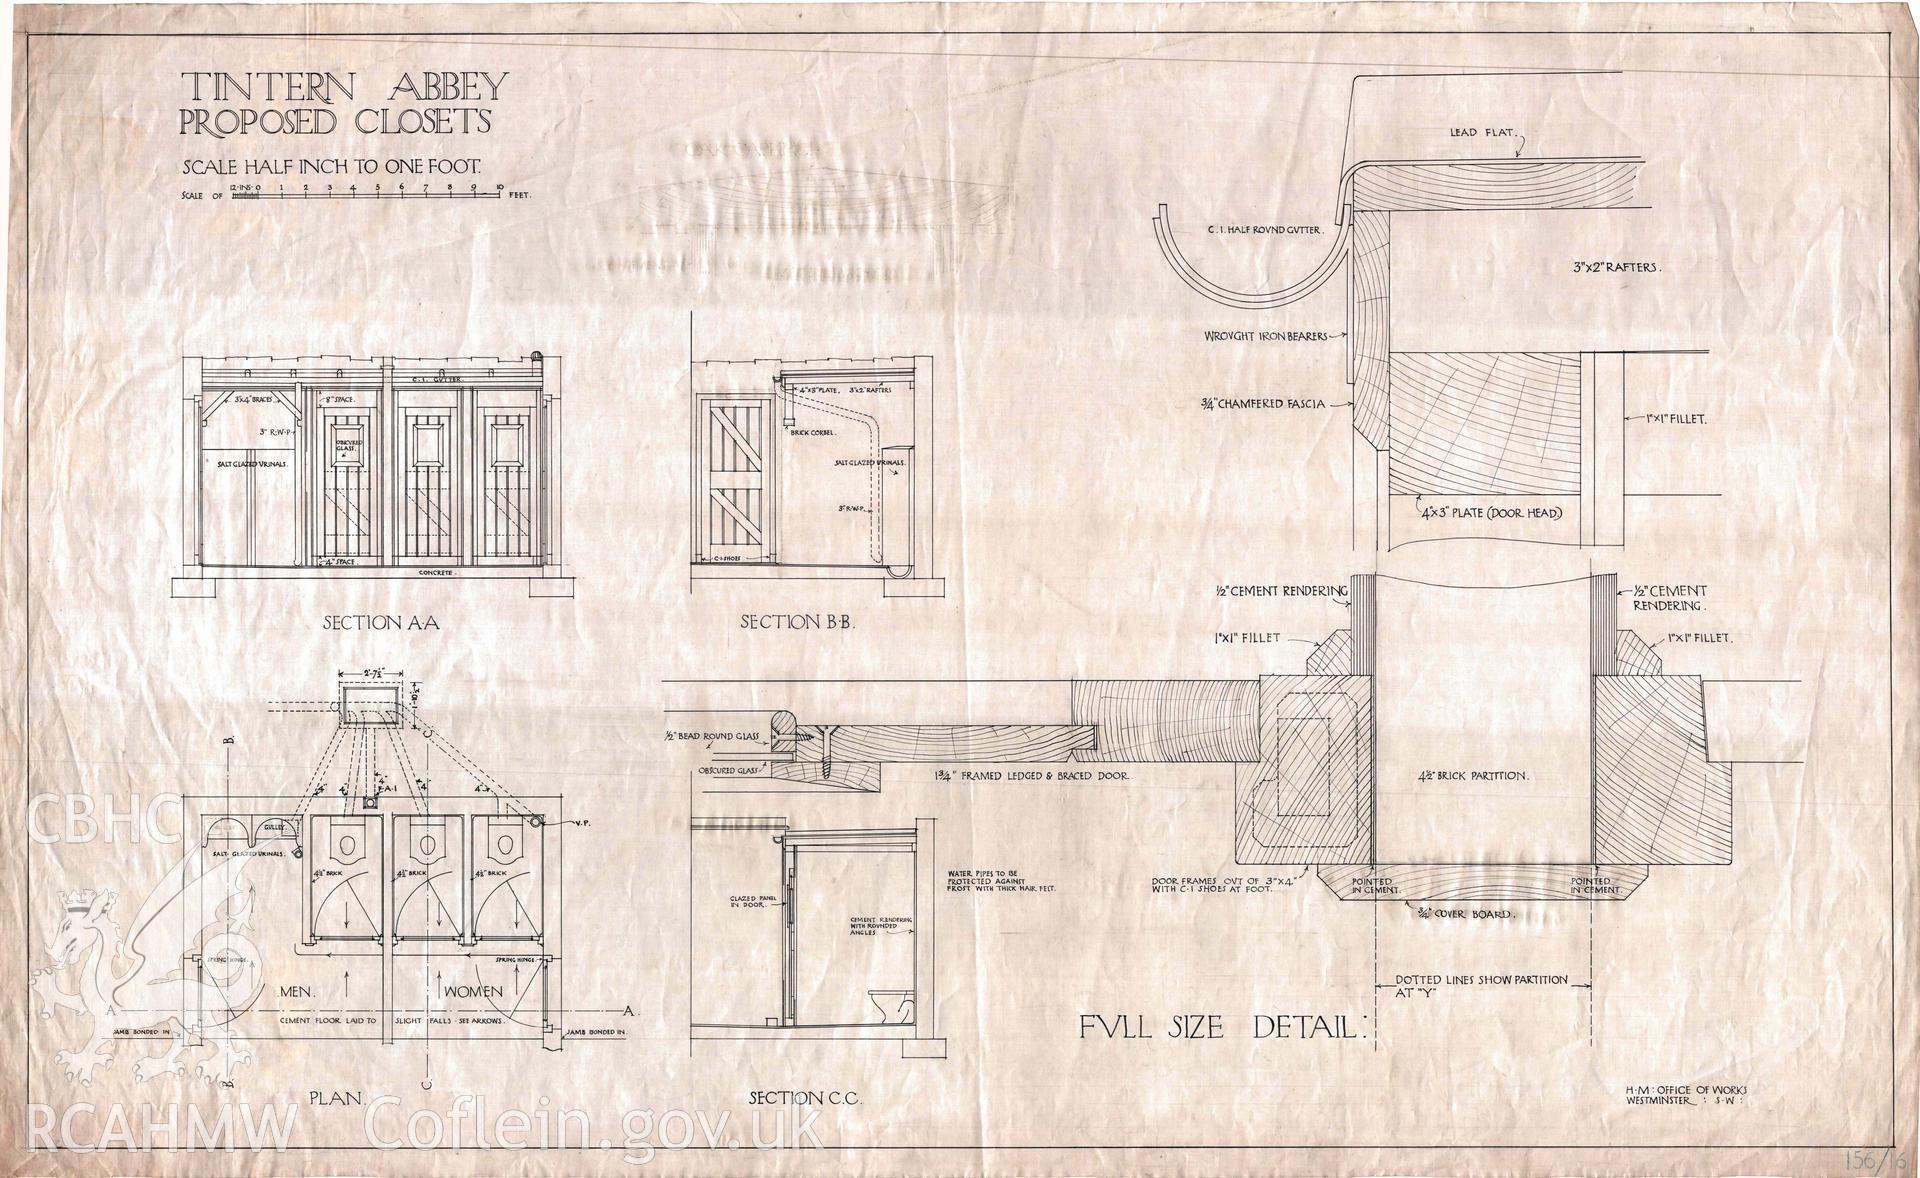 Cadw guardianship monument drawing, plans and details of proposed proposed latrines, Tintern Abbey.